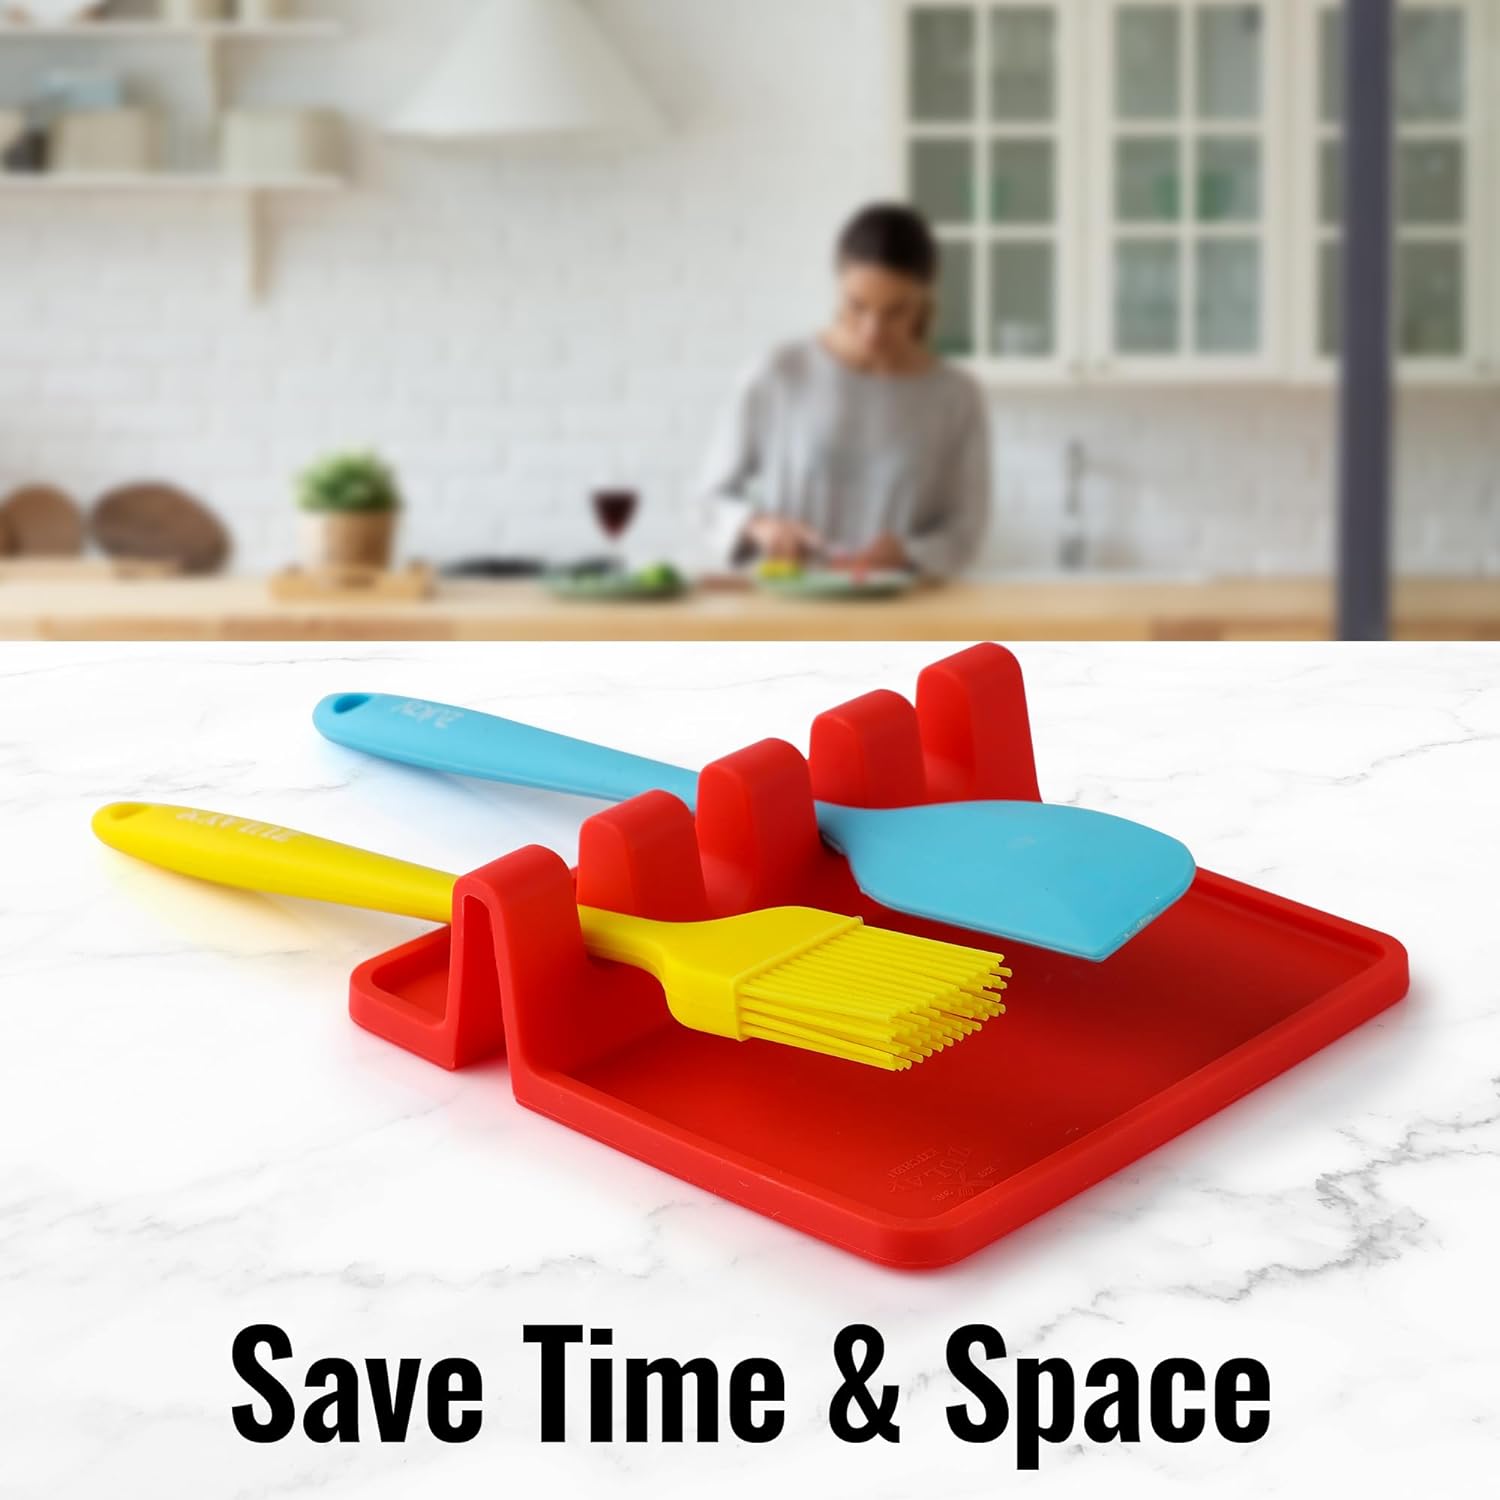 Zulay Kitchen Silicone Utensil Rest with Drip Pad - Bright Red